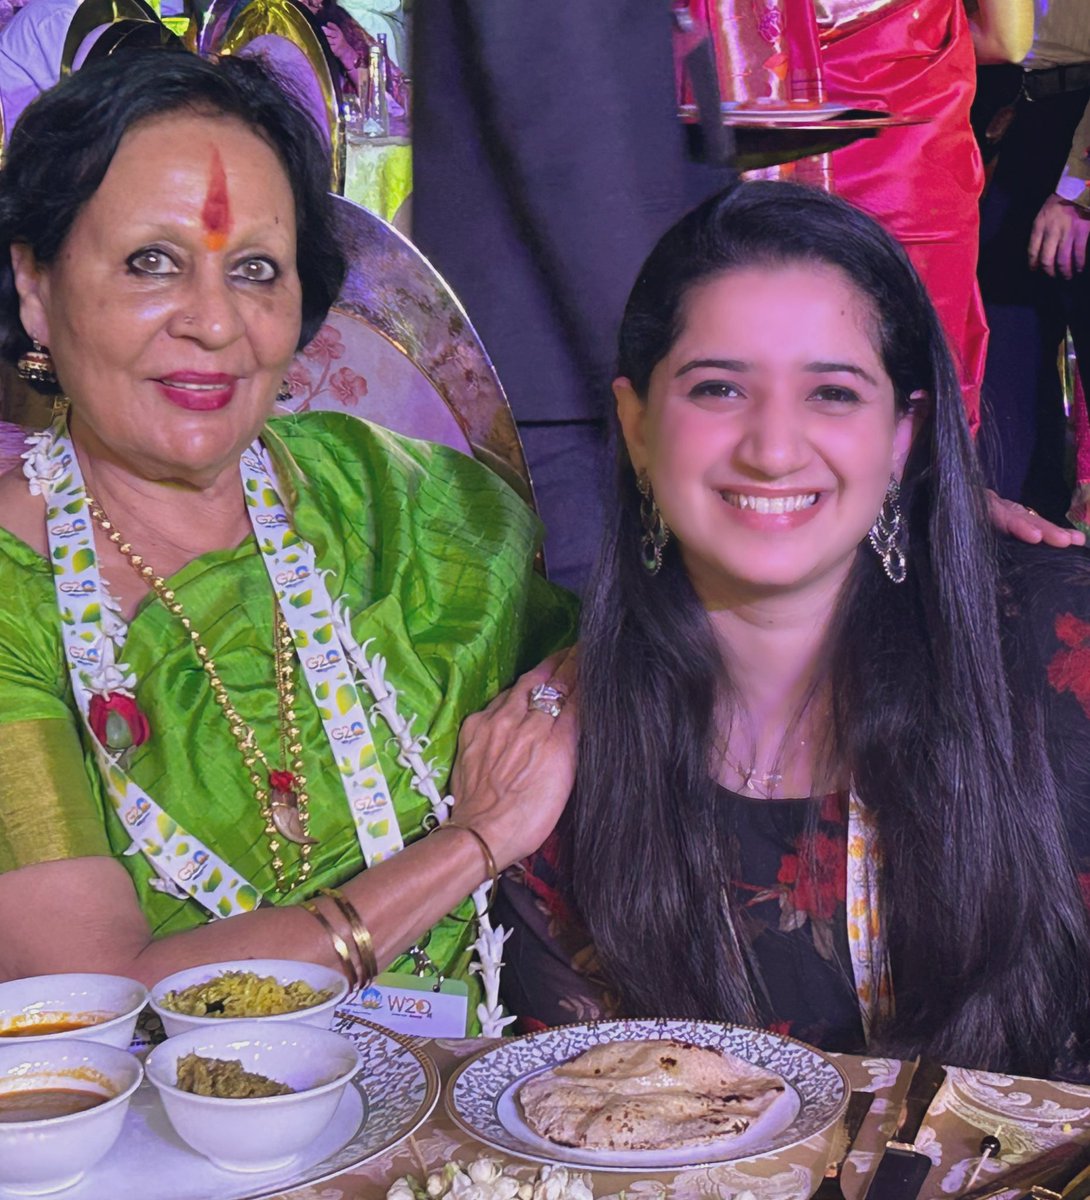 Happy 80th birthday to Padma Vibhushan @sonal_mansingh ji 🙏🏻 Such an inspiration you are to me and many more young women out there. Those 40 minutes during the W20 meeting were more than just a quick dinner meeting. Cant thank you enough for the warmth that you showered.